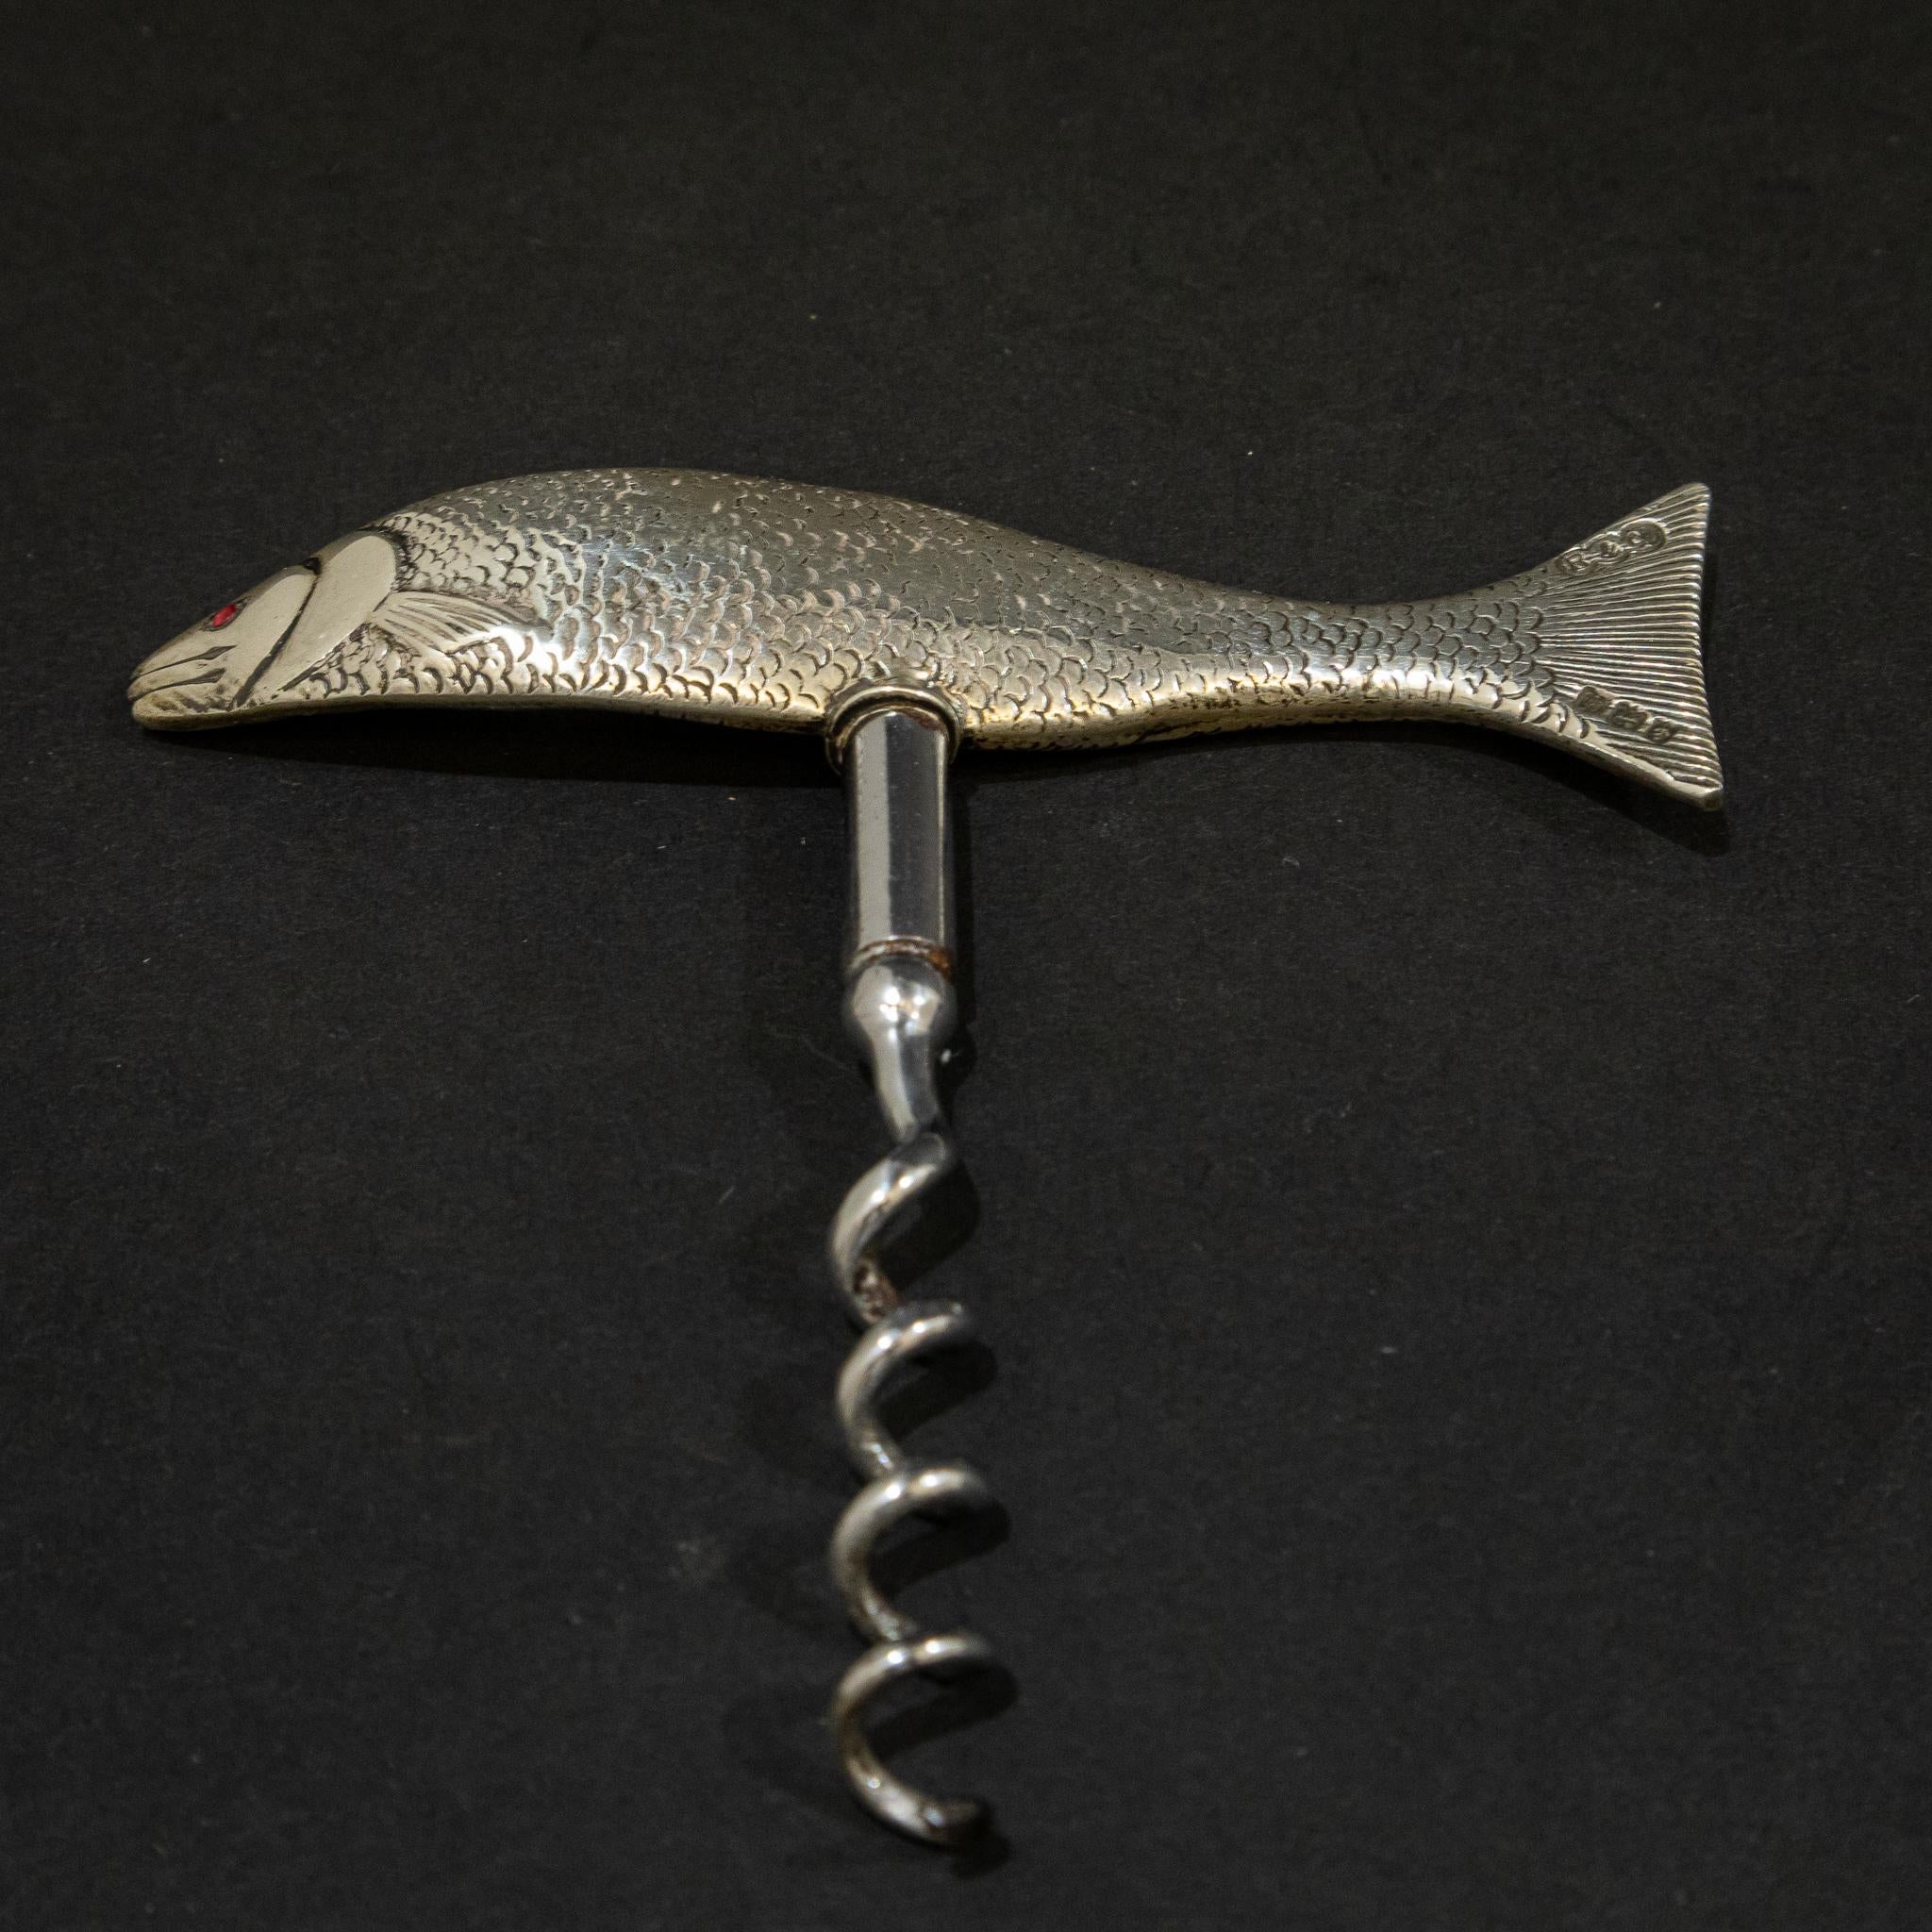 This wonderful novelty corkscrew is in the form of a fish which is made of solid sterling silver. Fine casting shows the scales and details of the fish with the body in movement and it has red jewelled eyes. It has a wonderful weight in the hand, at